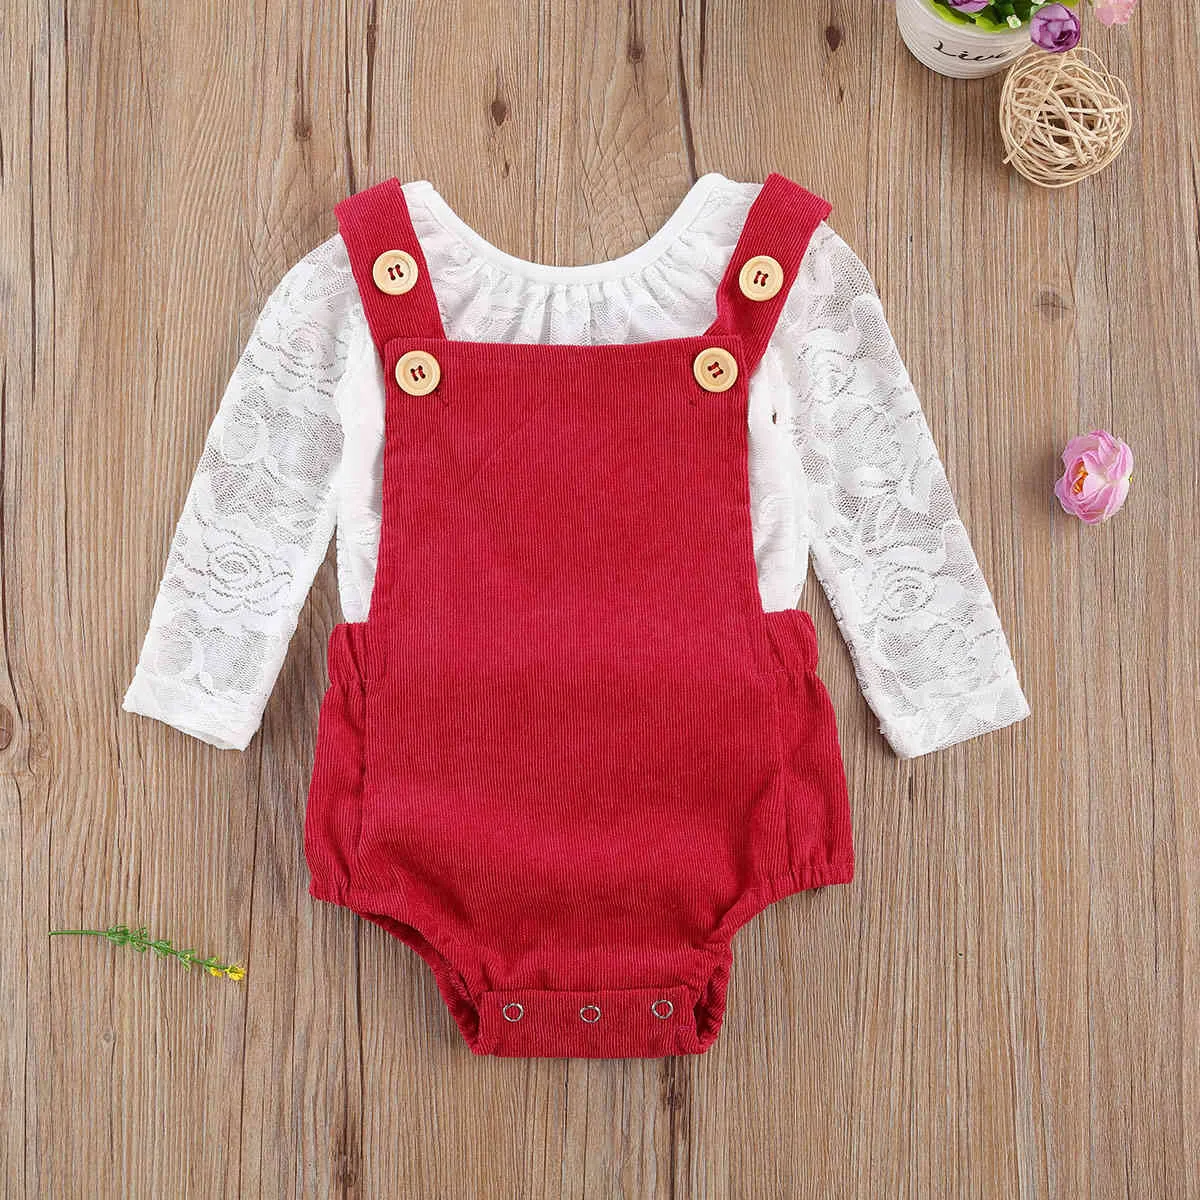 0-18M Christmas Infant born Baby Girl Clothes Set White Lace Romper Red Corduroy Overall Outfits Autumn BABY Clothing 210515